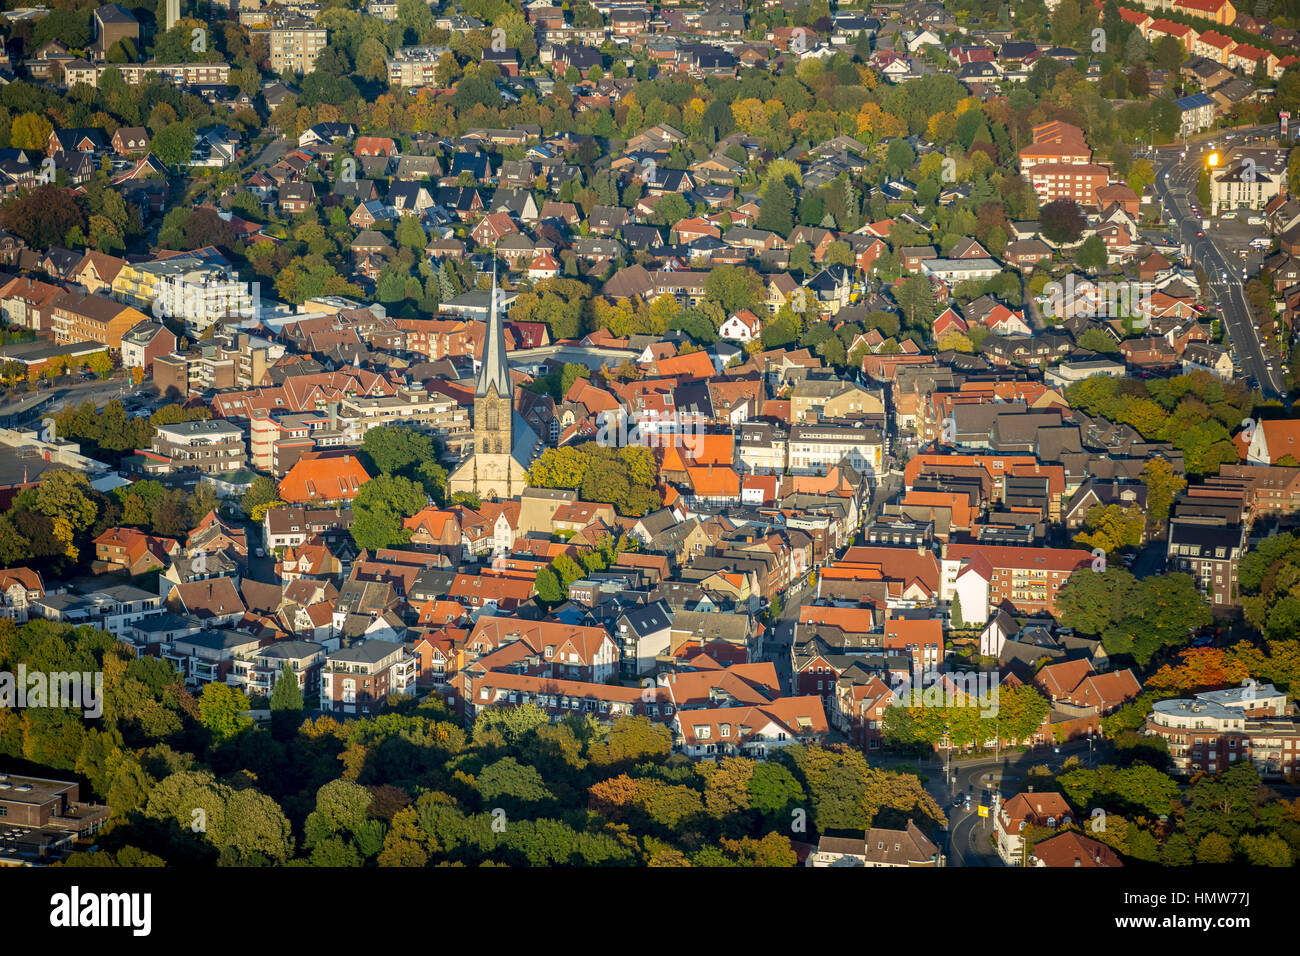 Historic city center Werne, aerial view, Werne, Ruhr district, North Rhine-Westphalia, Germany Stock Photo